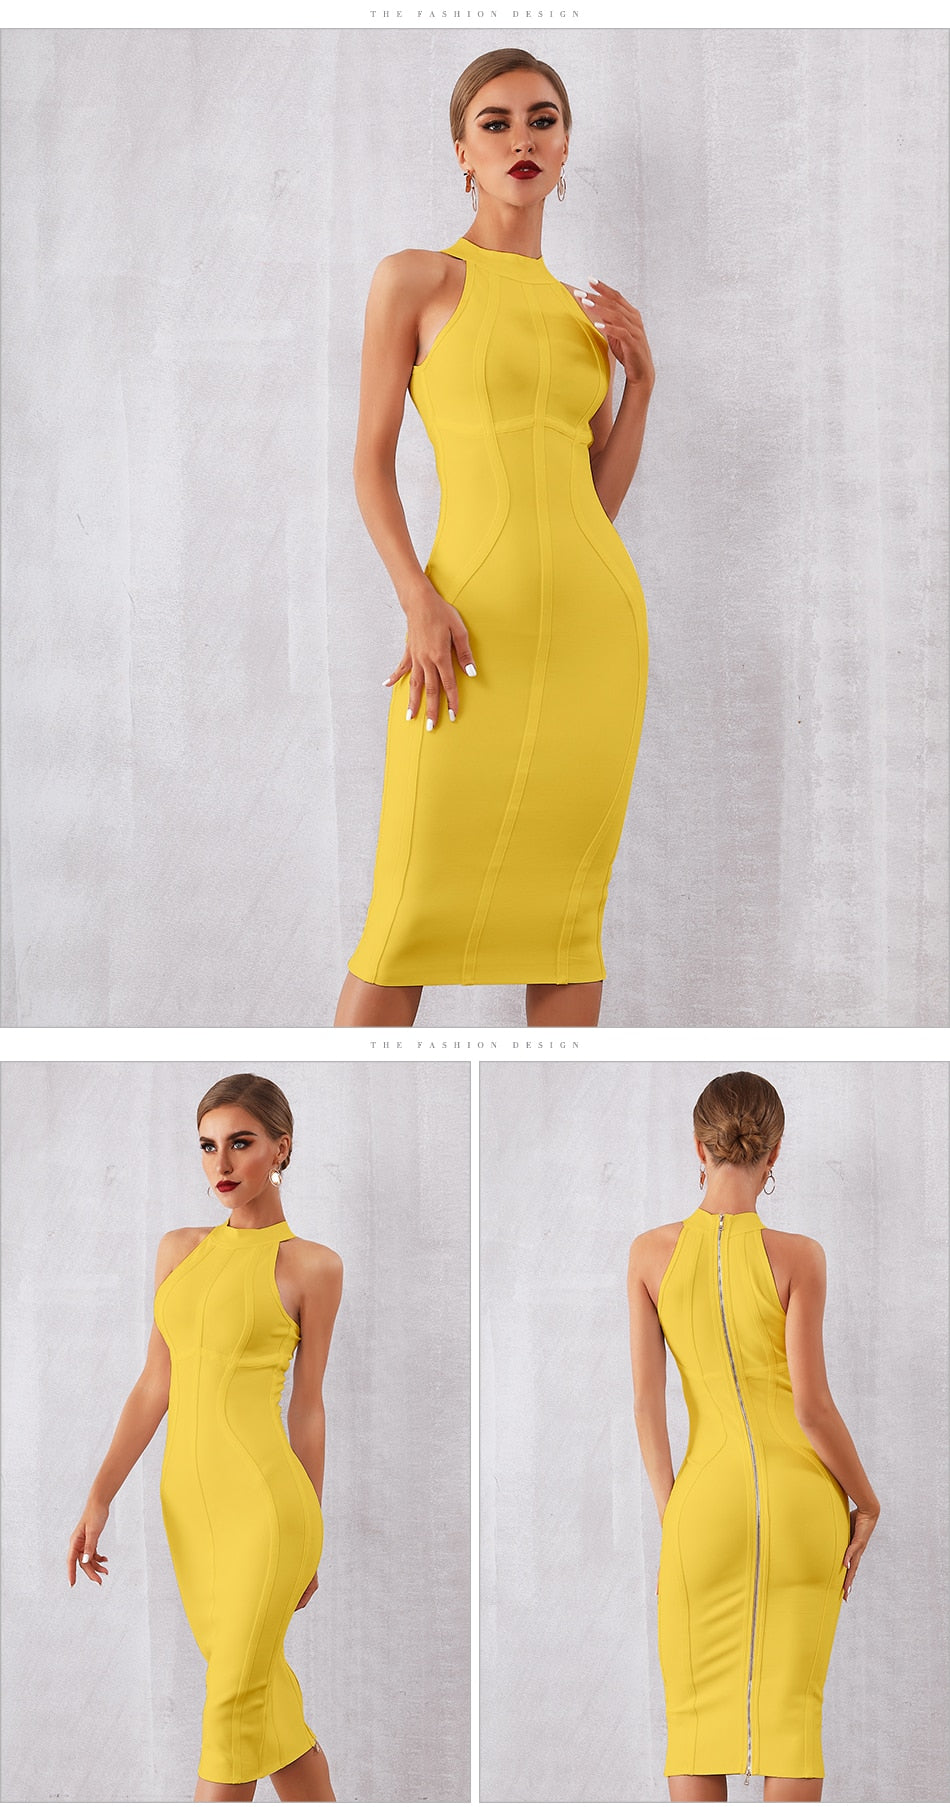 New Summer Bodycon Bandage Party Dress - DS0011